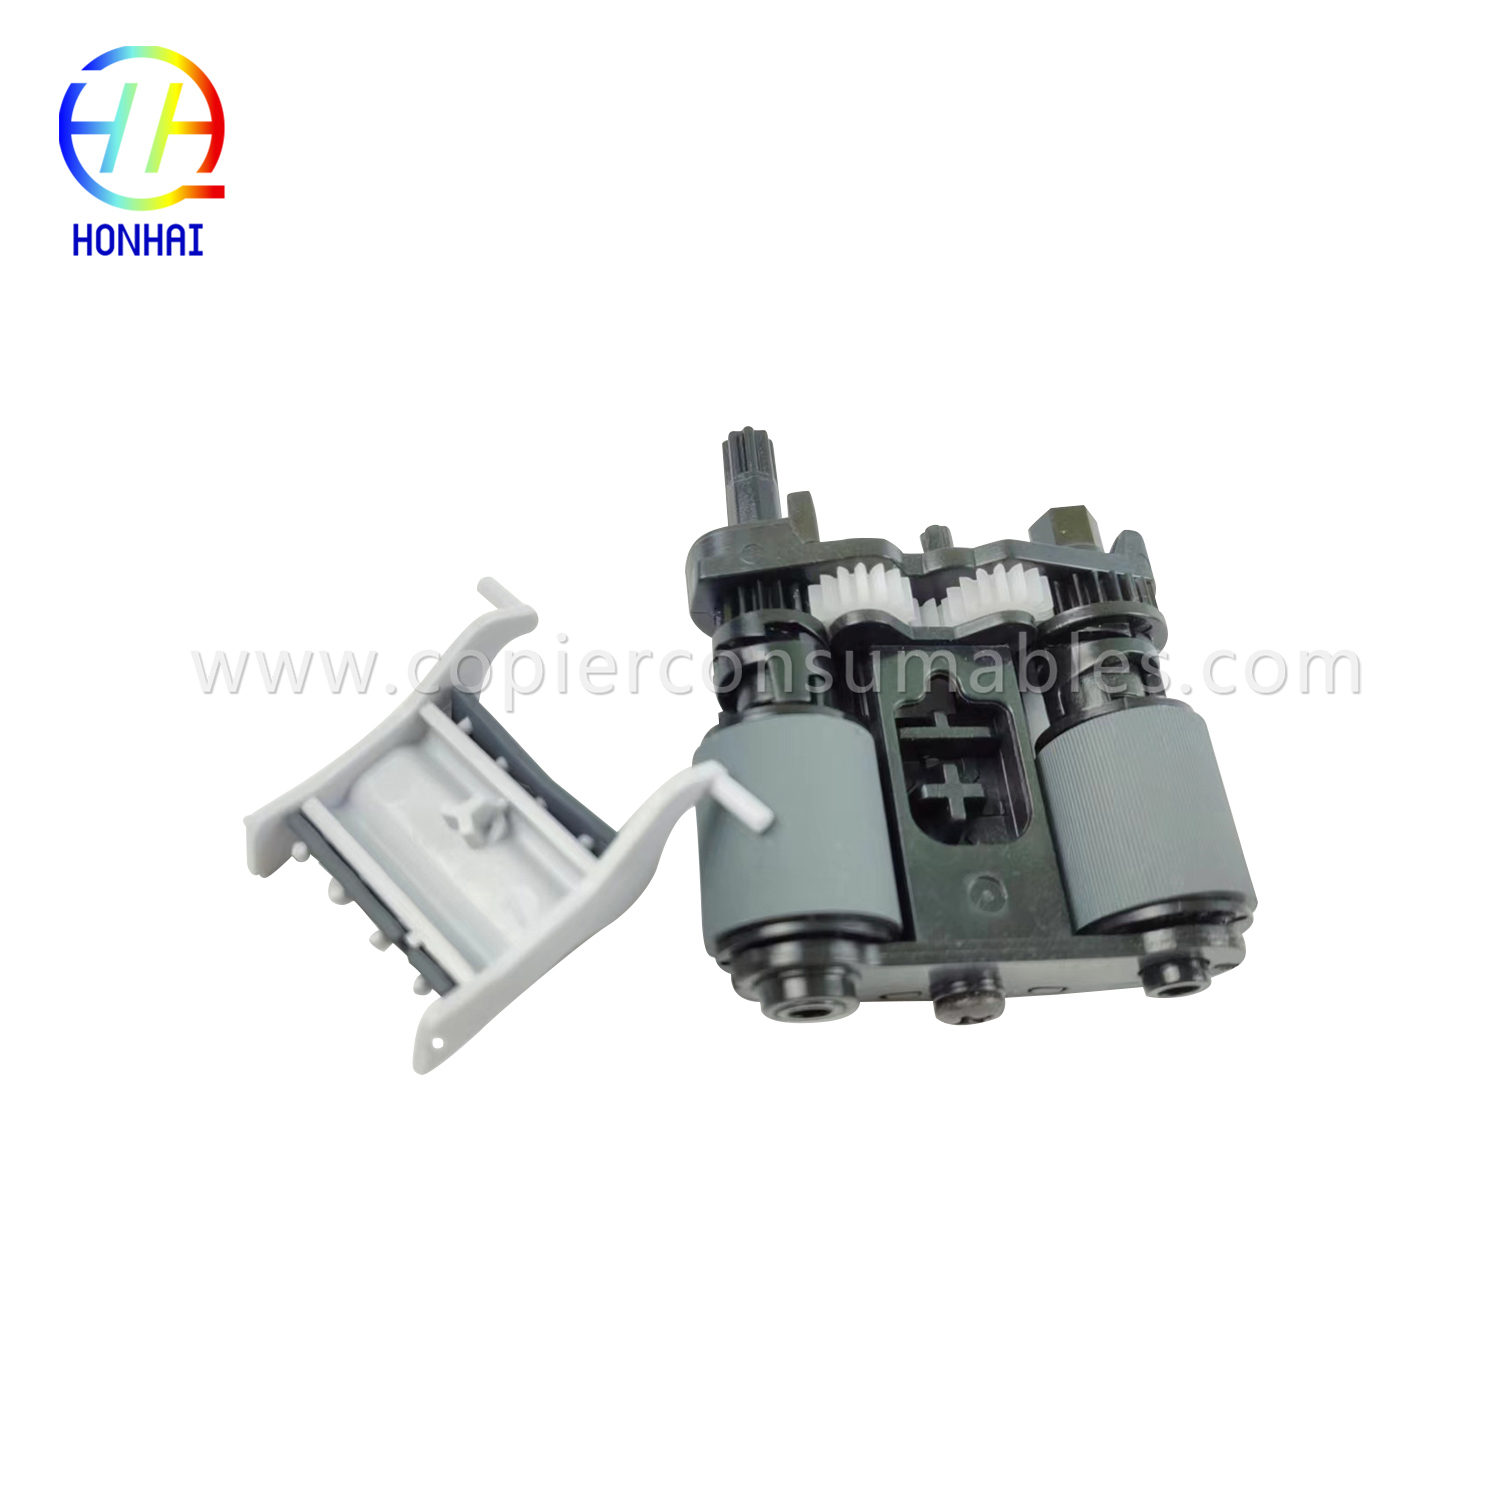 ADF Pickup Roller Assembly don HP Launi LaserJet Pro MFP M281fdw M377dw M477fdn M477fdw M477fnw M426fdn M426fdw B3Q10-60105